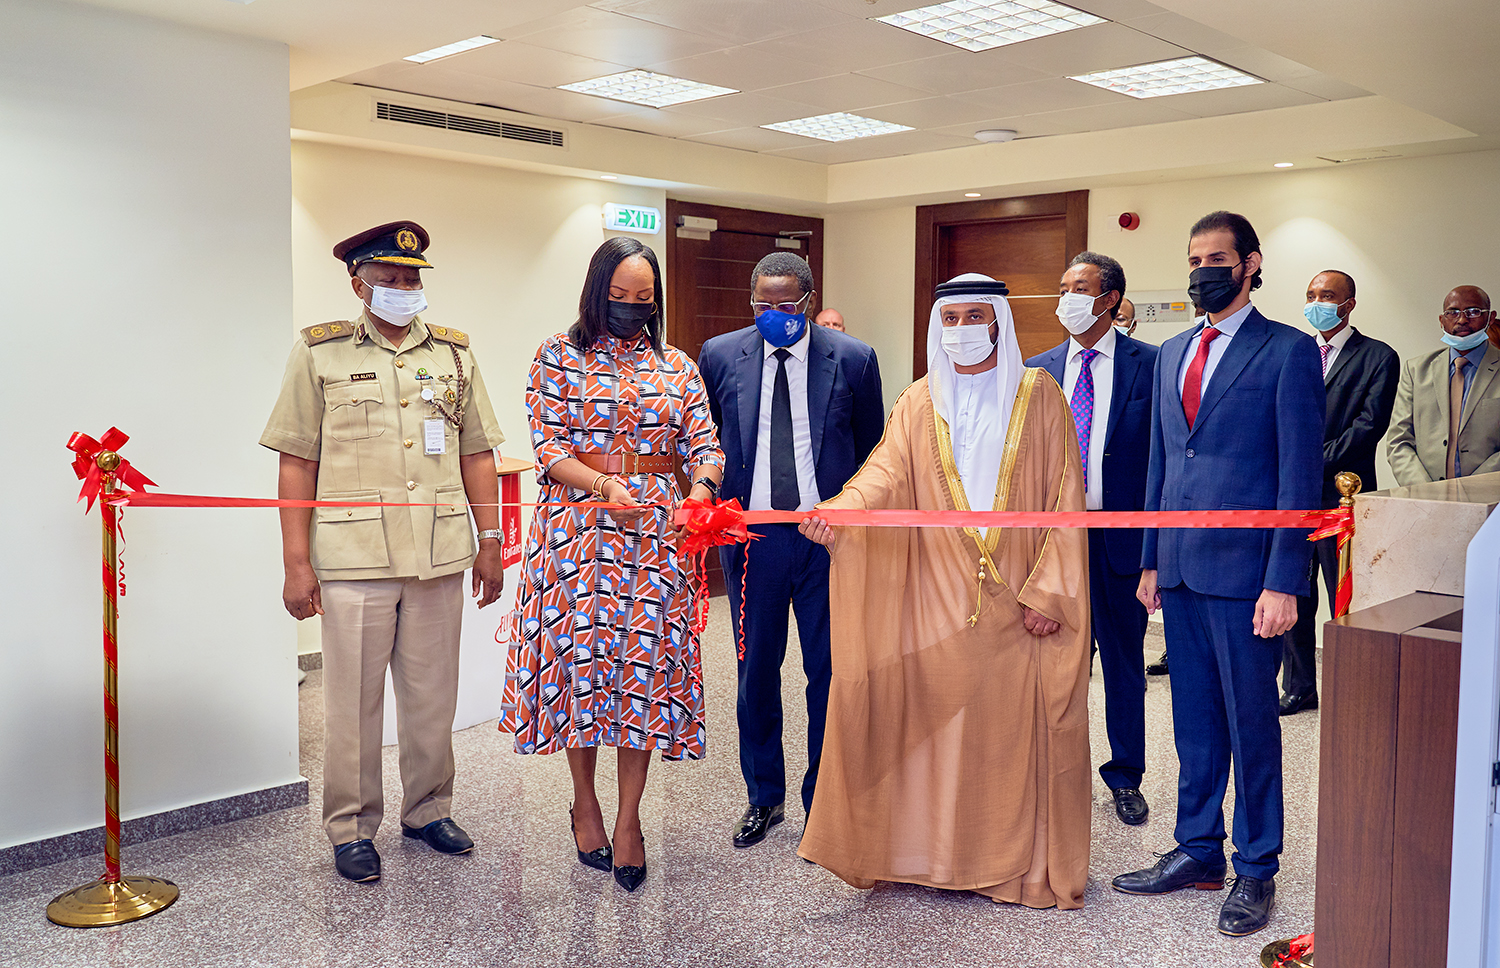 You are currently viewing The United Arab Emirates (UAE) inaugurates a Visa Application and document attestation Centre in Lagos, Nigeria.